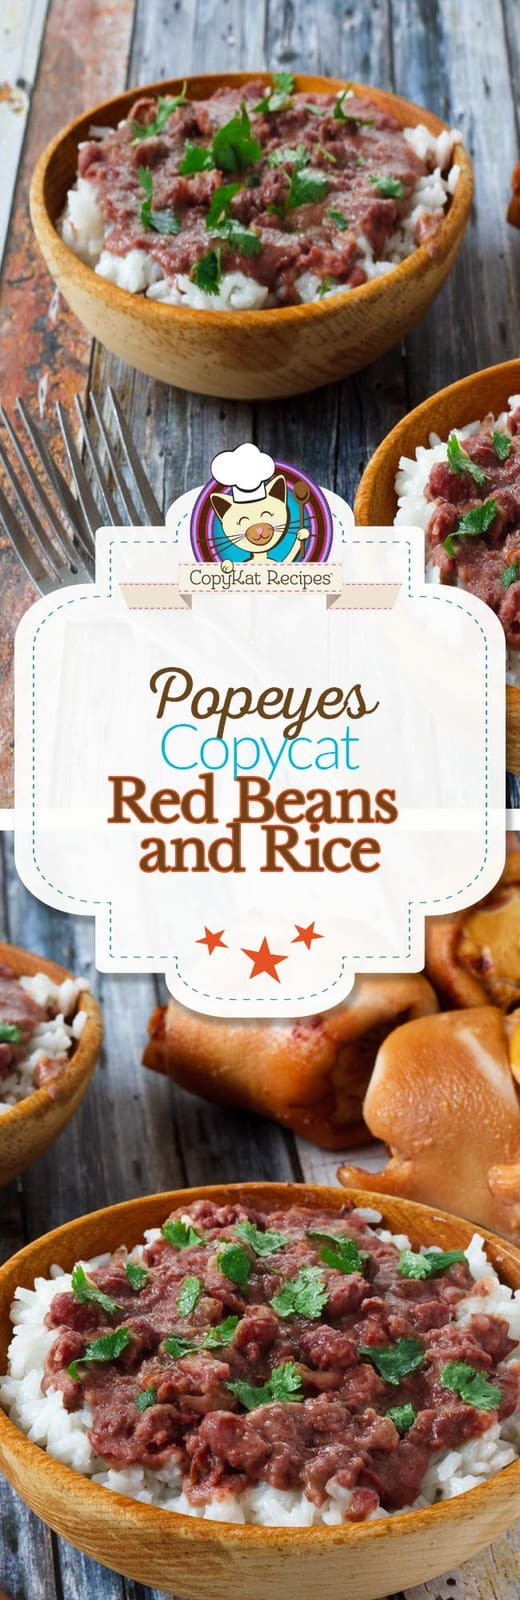 Popeyes Red Beans And Rice
 Popeyes Red Beans and Rice Copycat Recipe